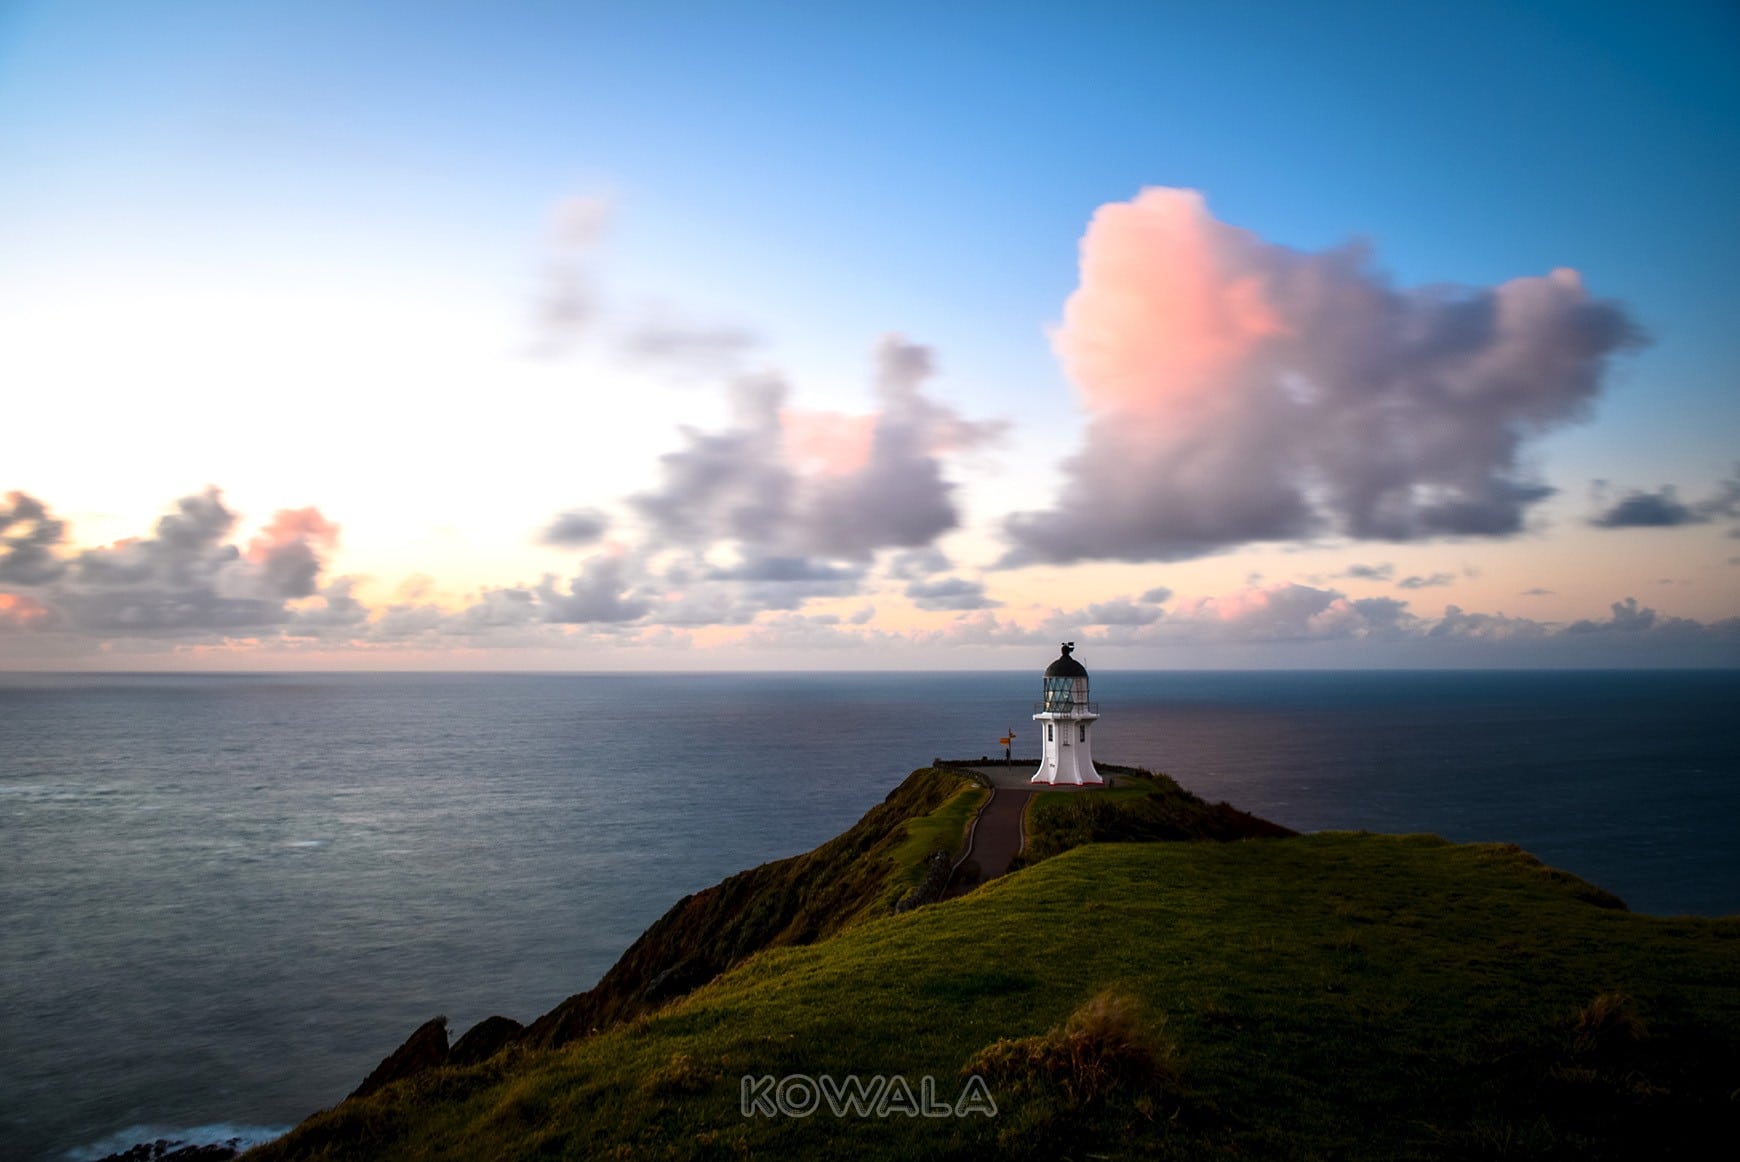 Cape-Reinga-Northland pvt nouvelle zelande new zealand whv road trip backpacker world planet country voyage aoteroa NZ camping